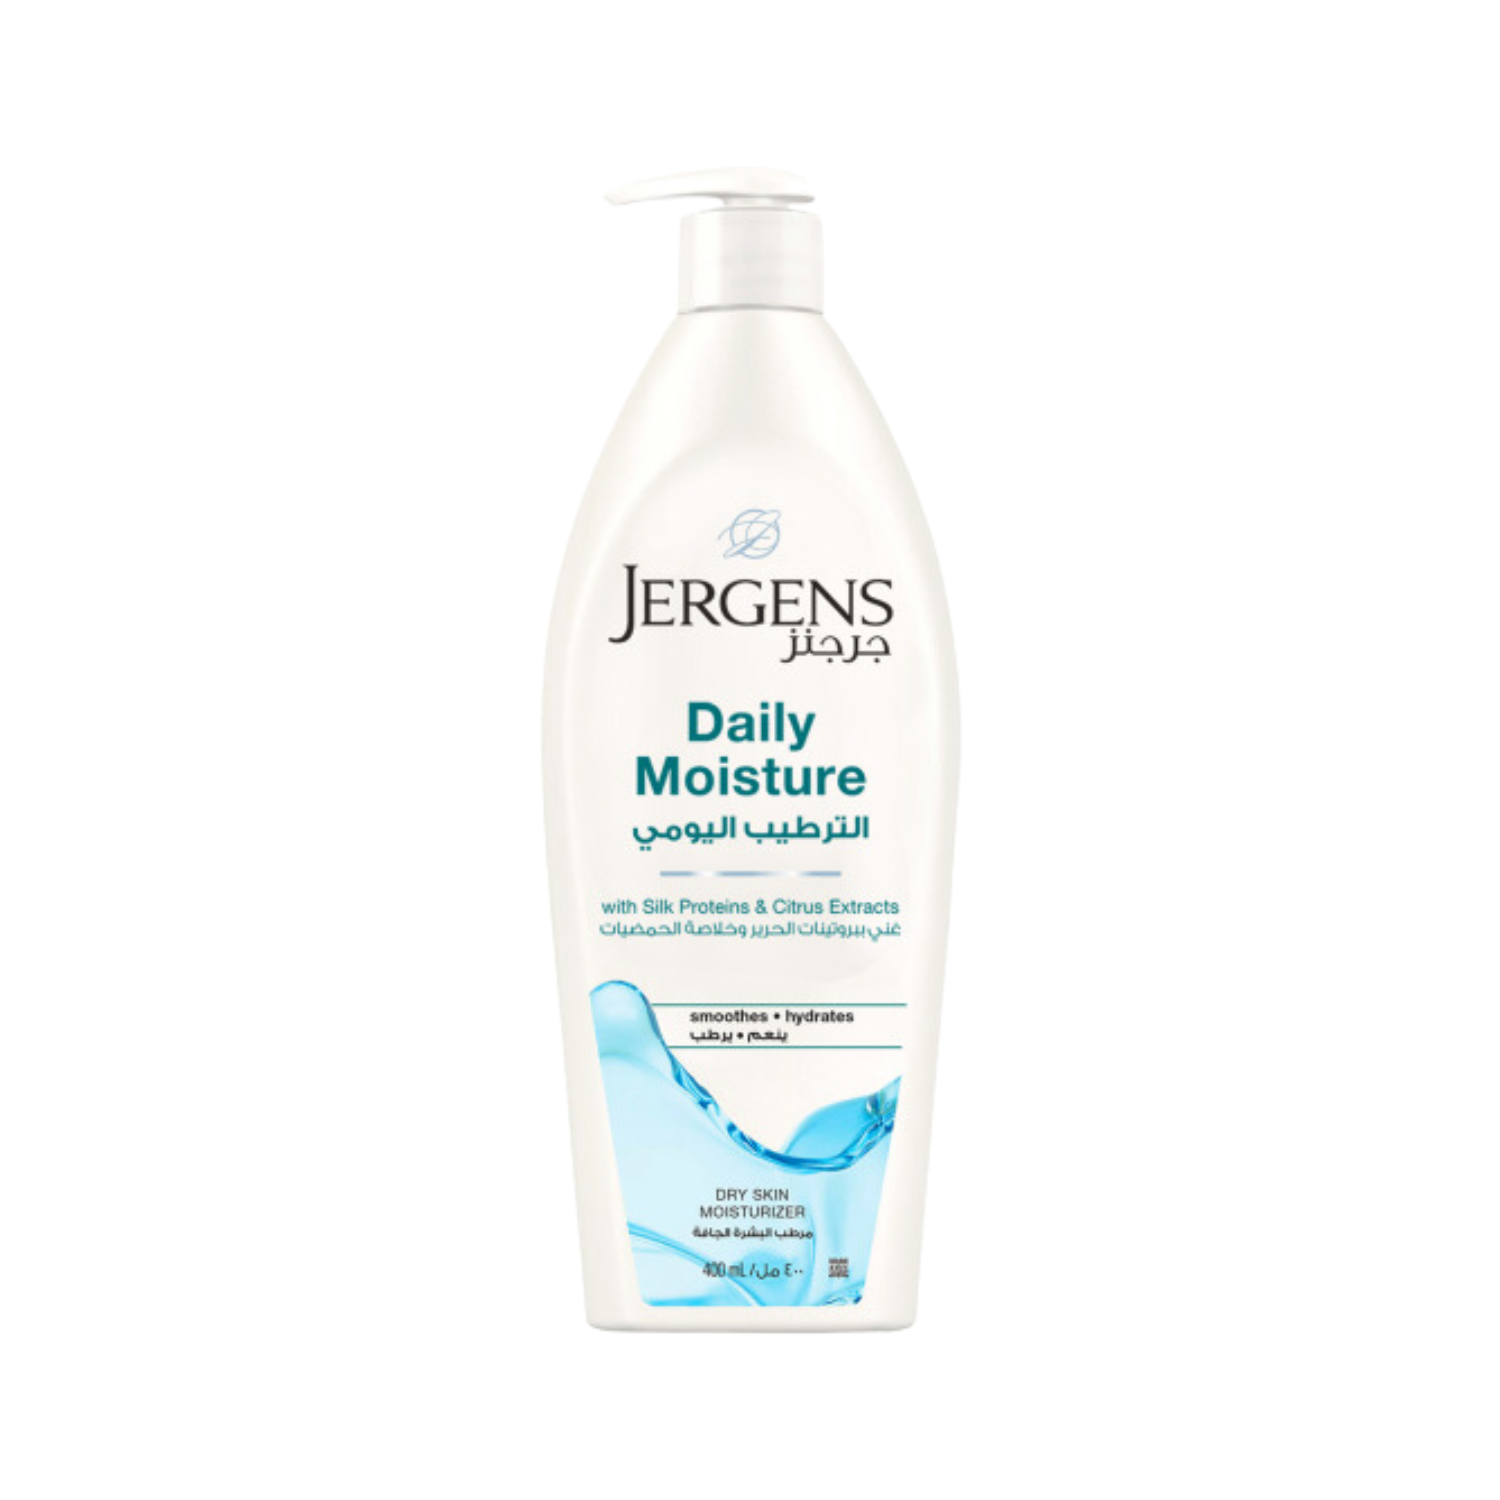 jergens-daily-moisture-with-silk-proteins-citrus-extracts-200ml